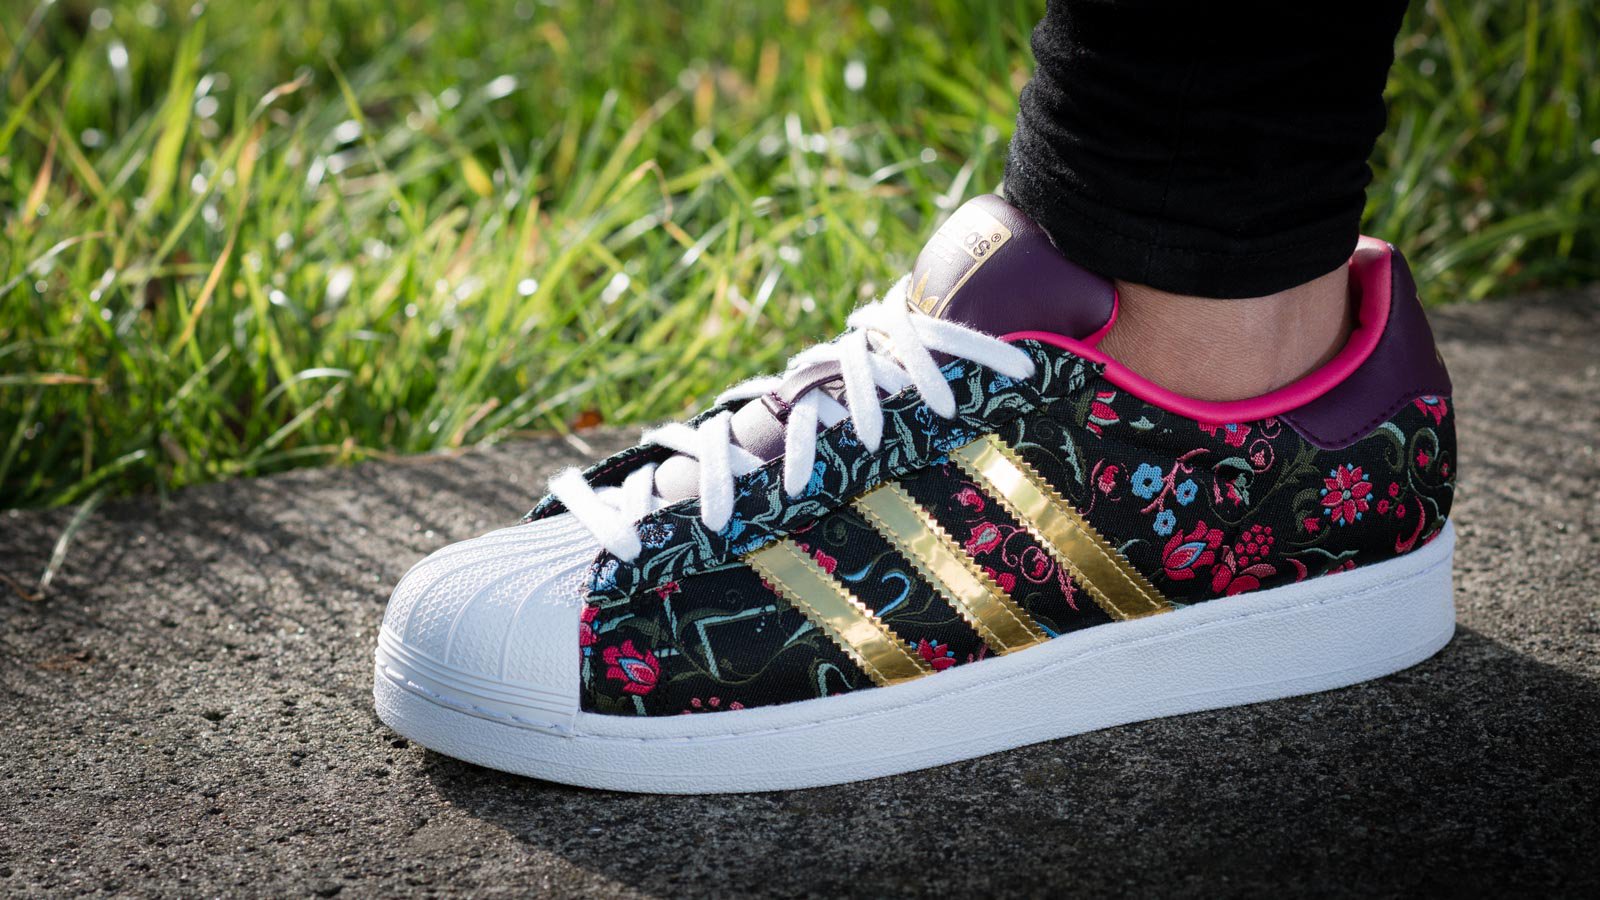 Referéndum conferencia Acorazado Foot Locker EU on Twitter: "🌸 🌸 The adidas Originals Superstar 'Moscow  Rose' now available online &amp; in store https://t.co/B9tU5XddEq  https://t.co/XzZNaTeEhs" / Twitter